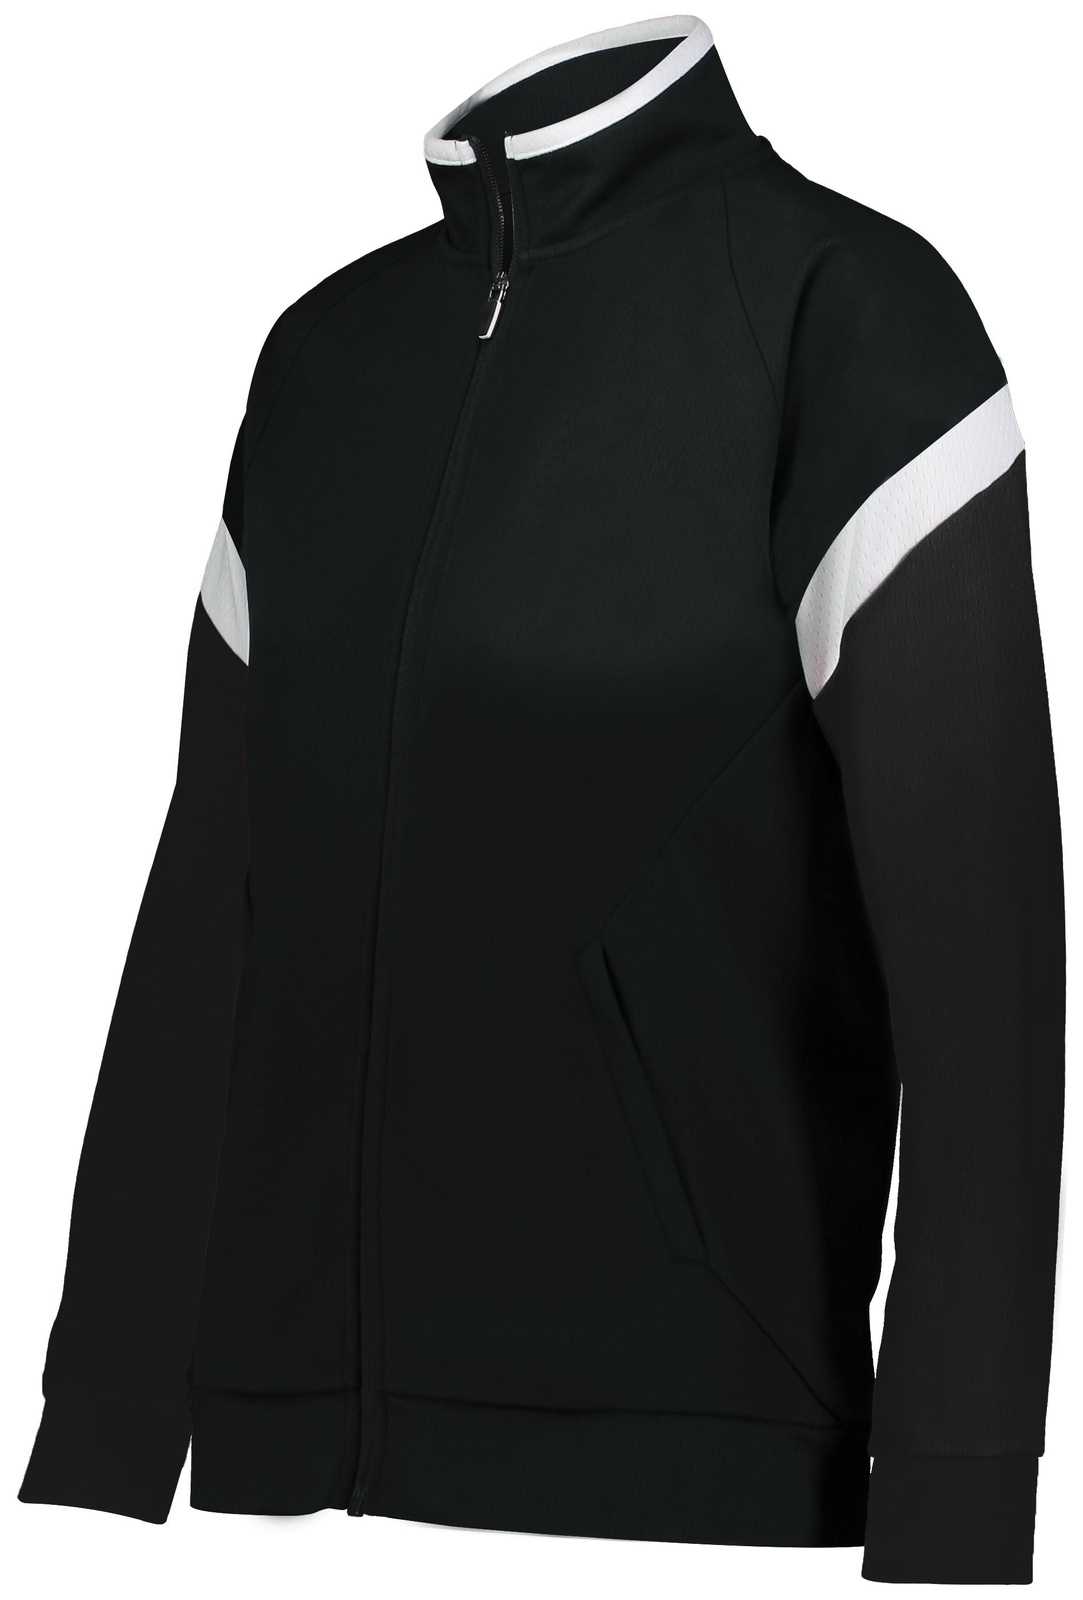 Holloway 229779 Ladies Limitless Jacket - Black White - HIT a Double